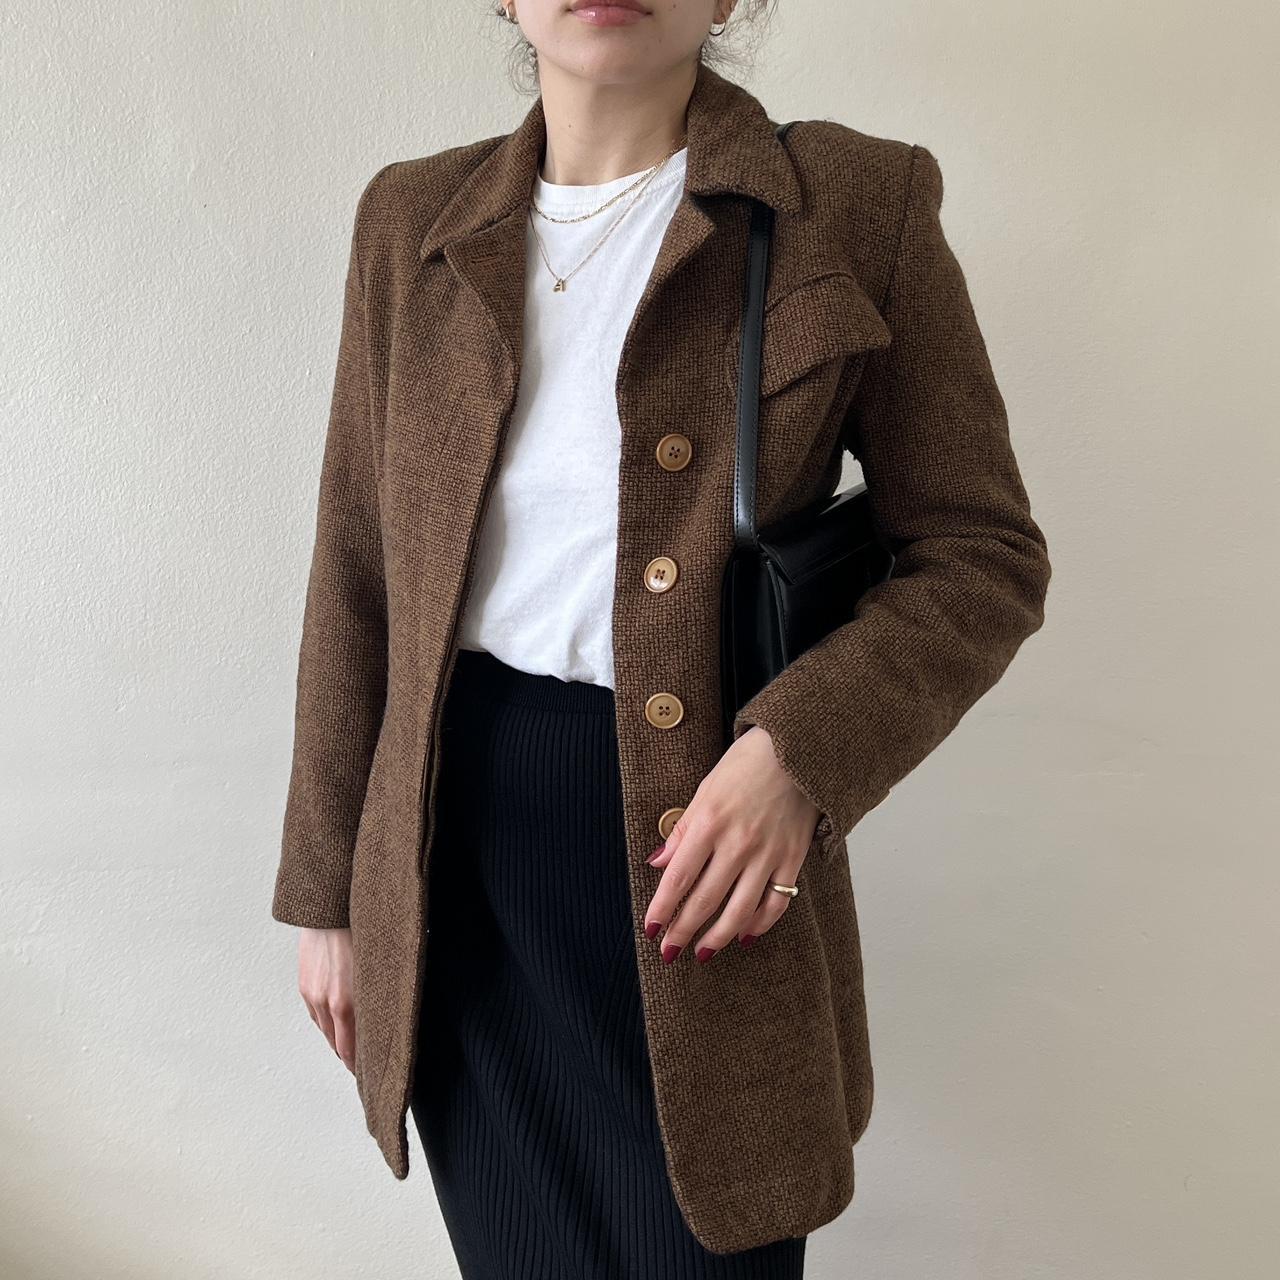 Saks Fifth Avenue Women's Brown and Tan Tailored-jackets | Depop